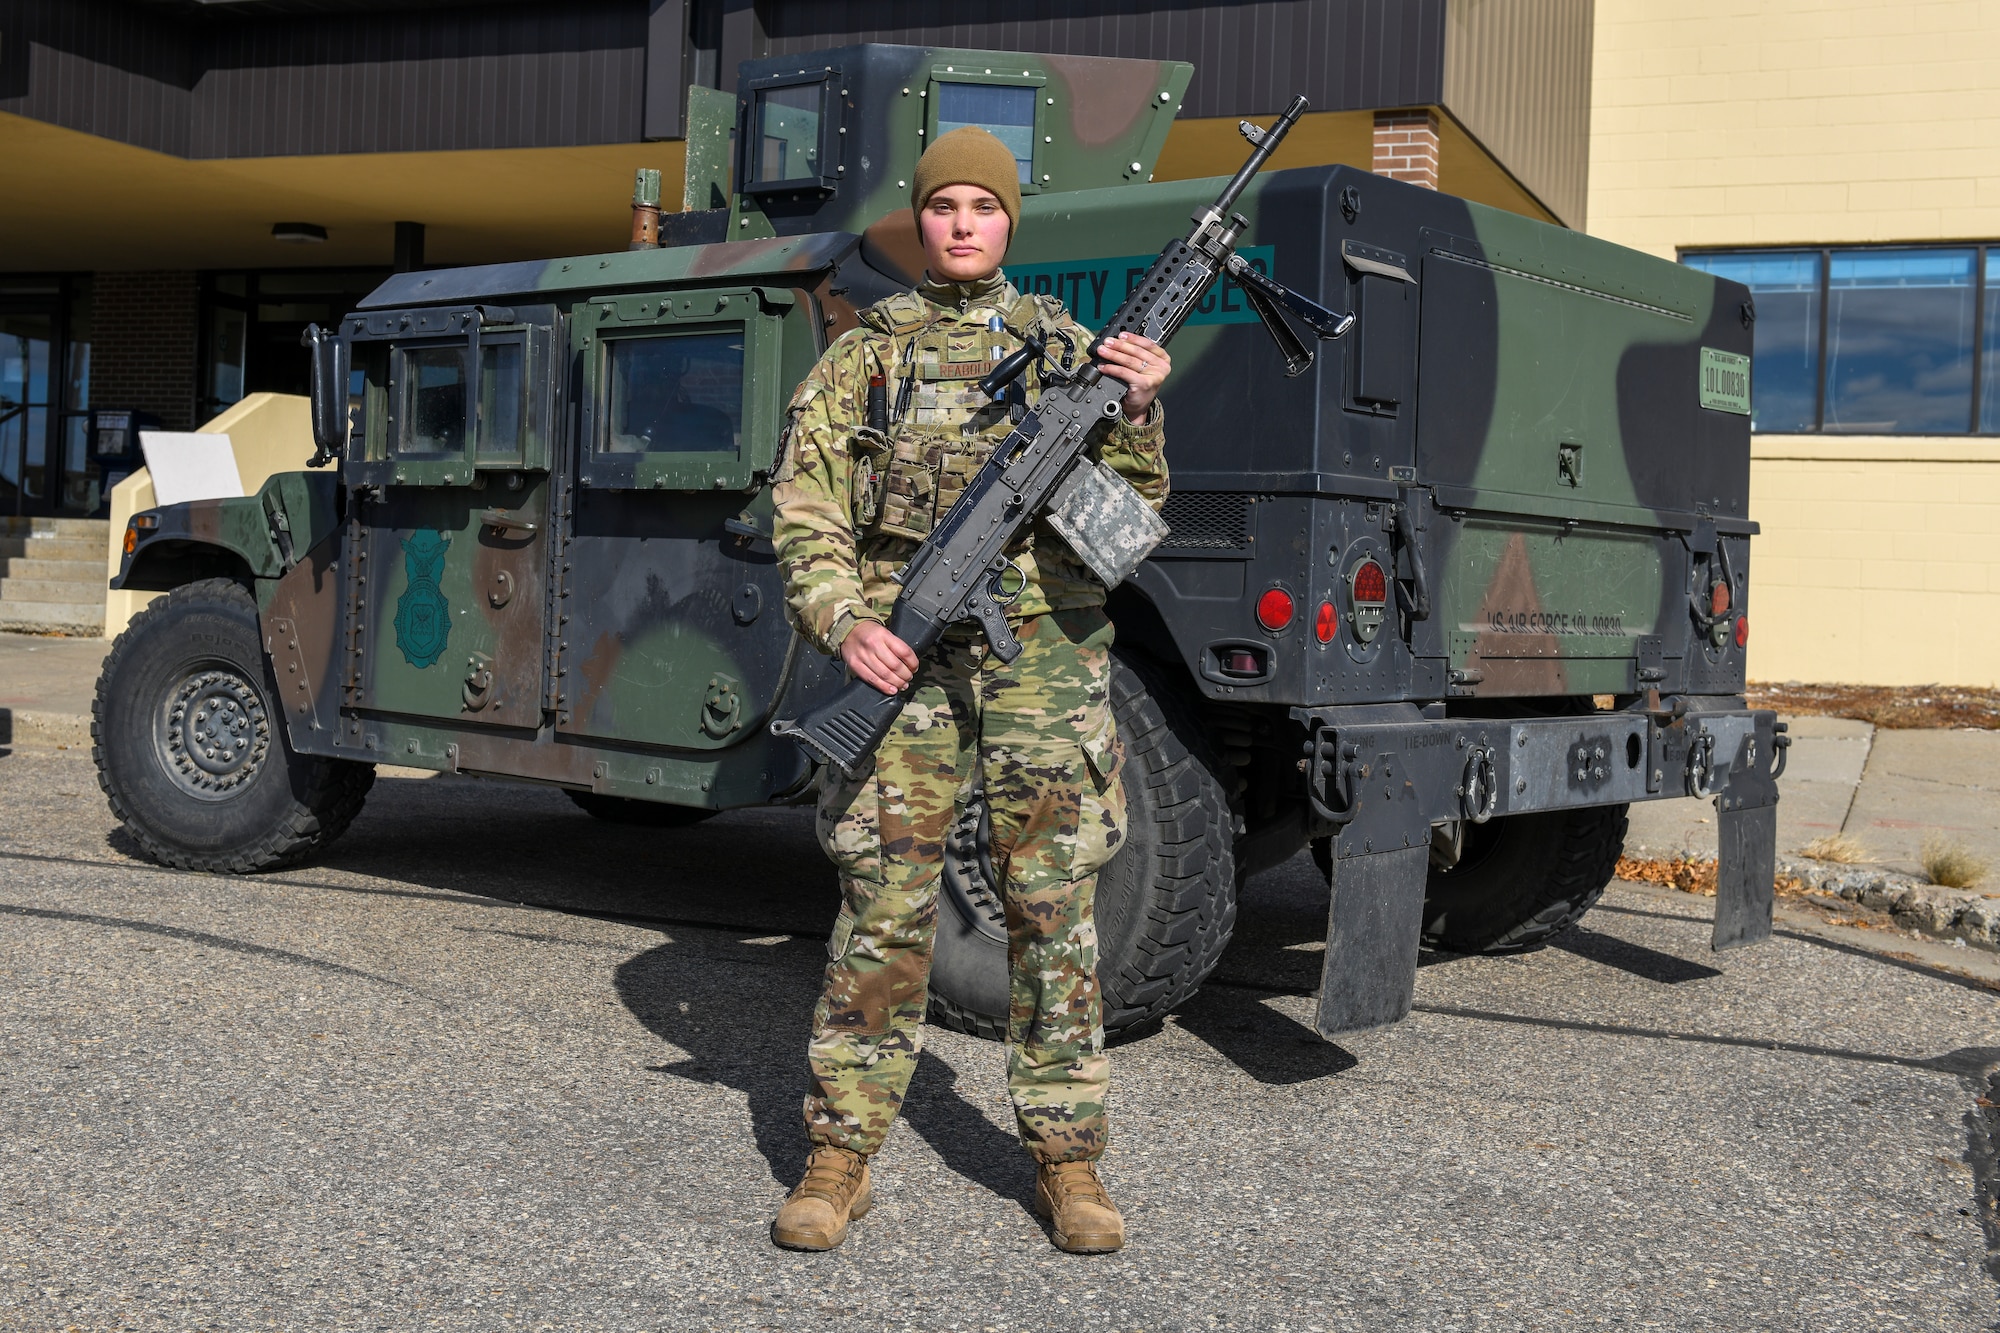 Airman 1st Class Lauryn Reabold, 5th Security Forces Squadron defender, poses for a portrait on Oct. 19, 2020 at Minot Air Force Base, North Dakota. Reabold operates the .240 Echo machine gun out of the Humvee turret on the lead convoy as she and her fellow defenders scout the road and inestigate the avenues of appoach. (U.S. Air Force photo by Airman 1st Class Josh W. Strickland)